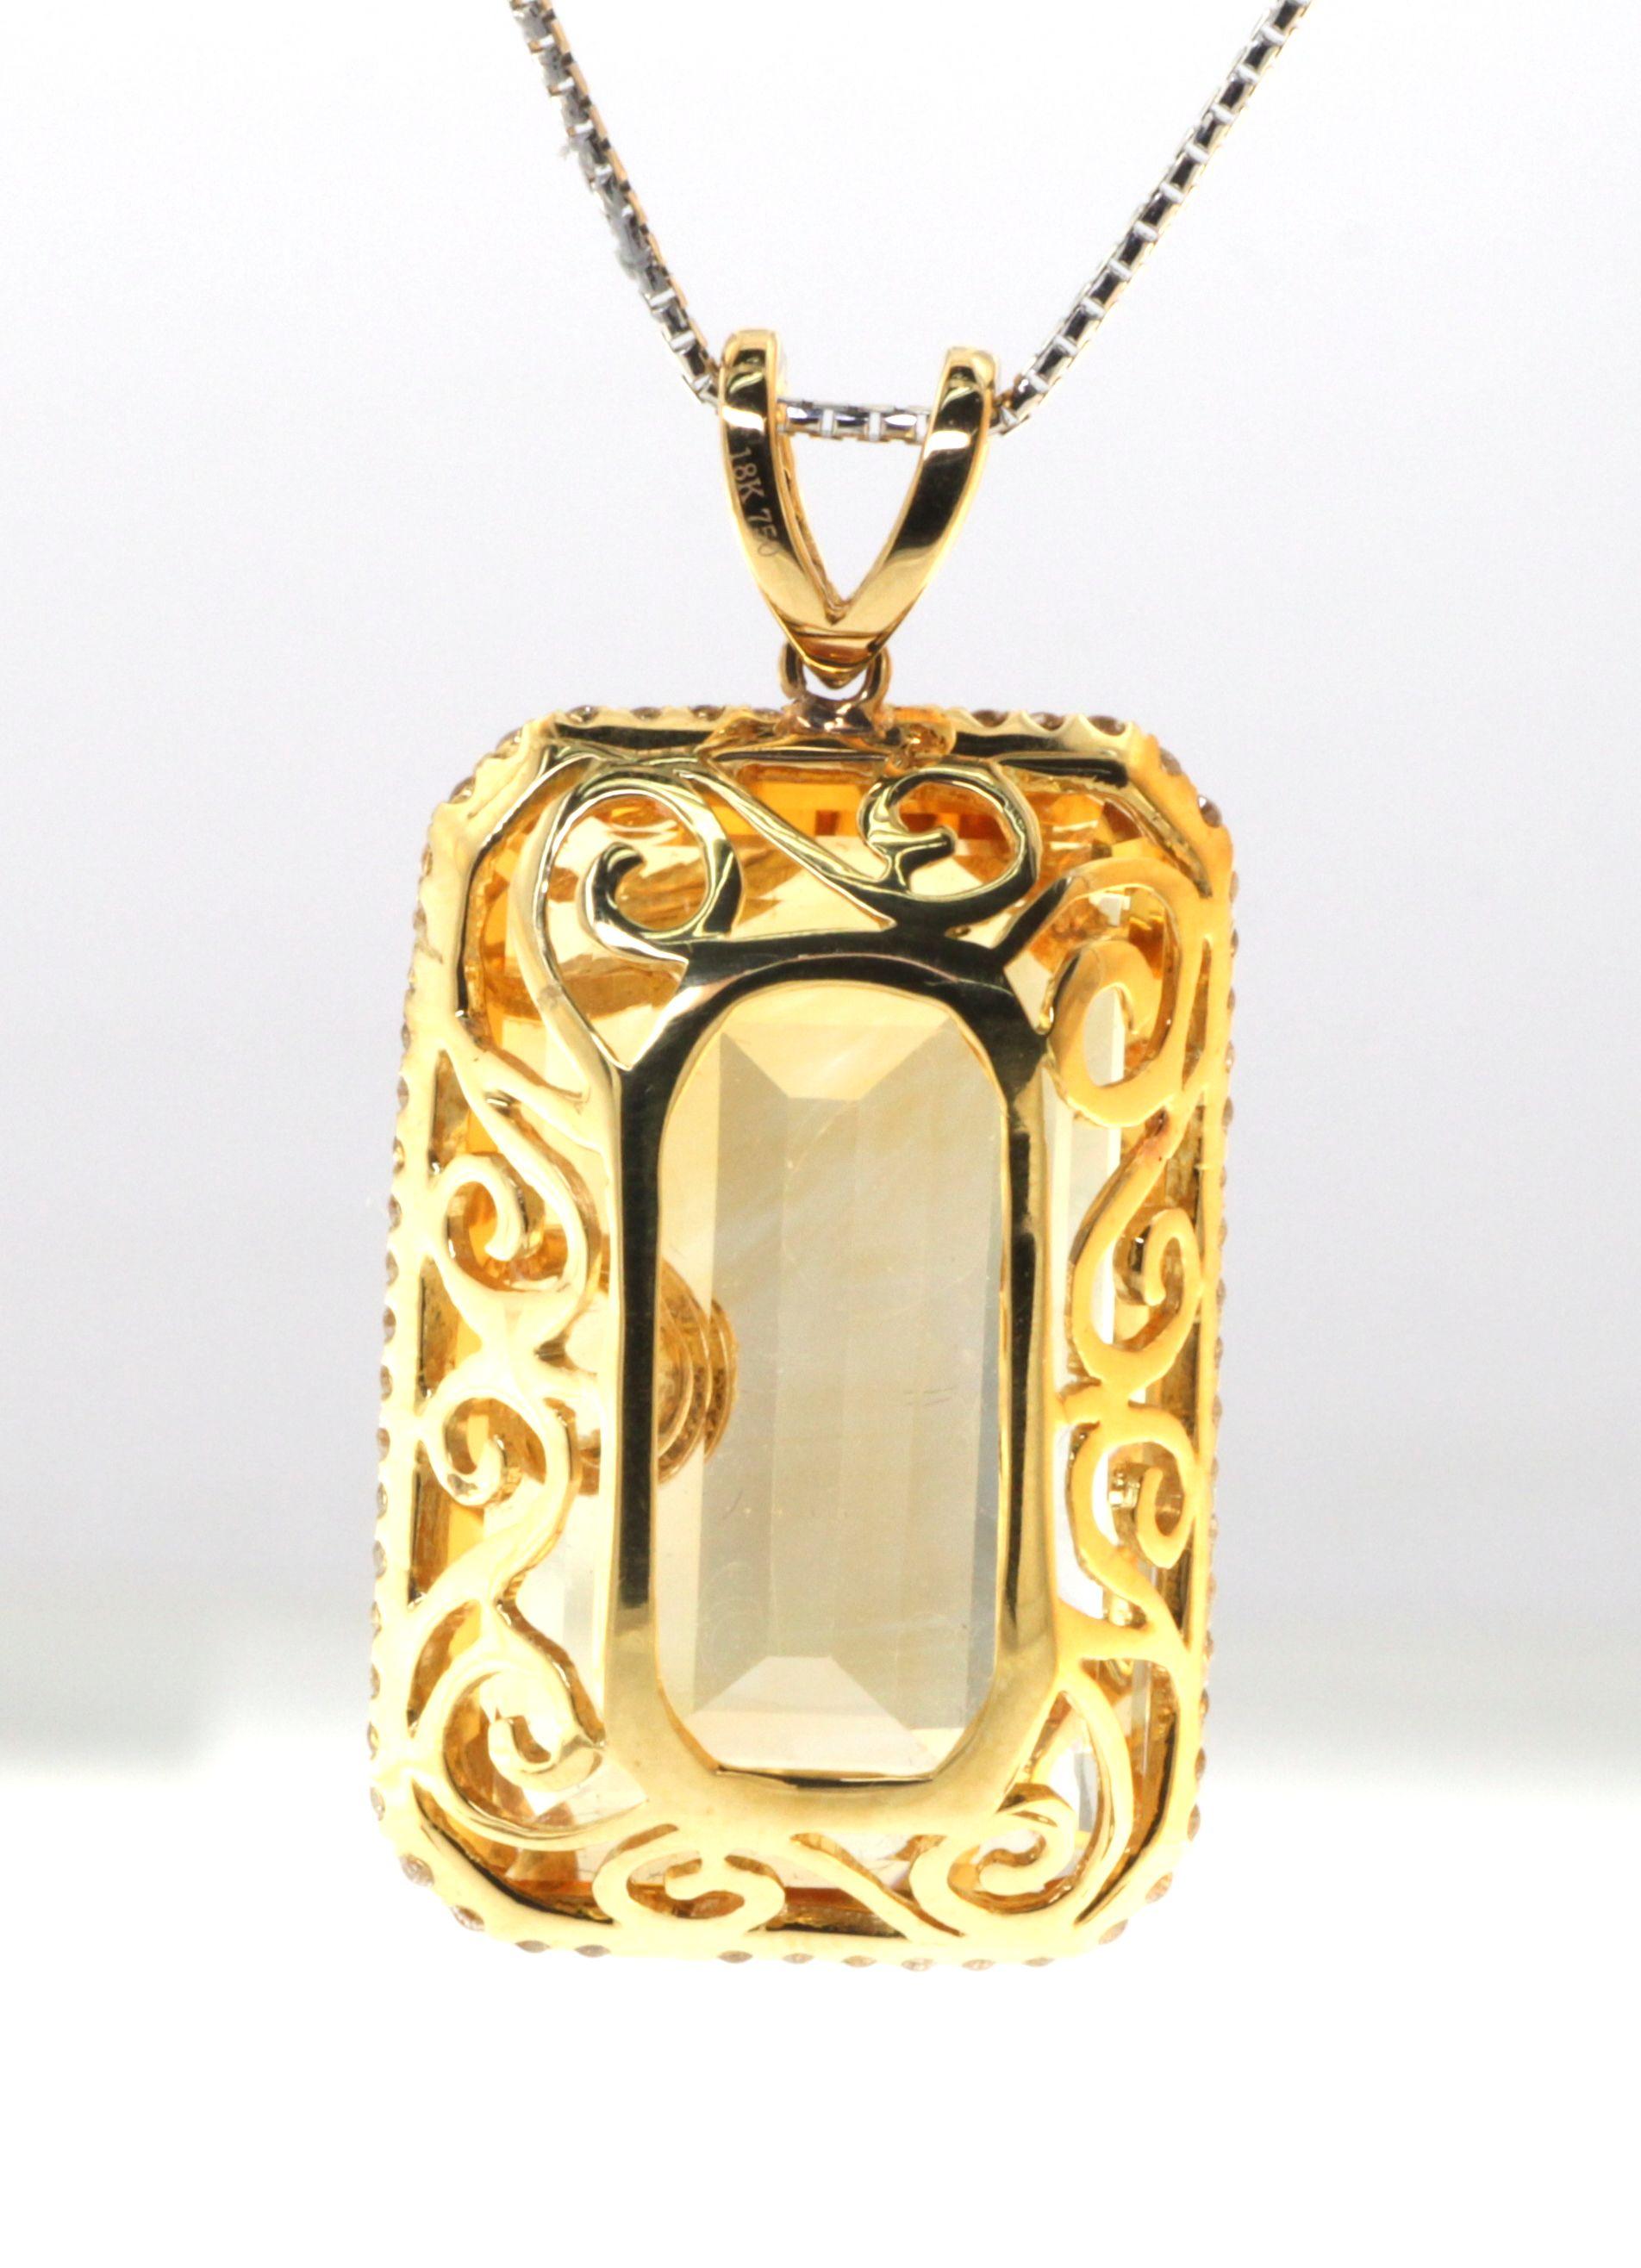 This stunning pendant is sure to turn heads with its bold and beautiful design. The centerpiece of the pendant is a magnificent 51.22 carat emerald cut citrine that is sure to catch the light and shimmer beautifully. The citrine is accented with